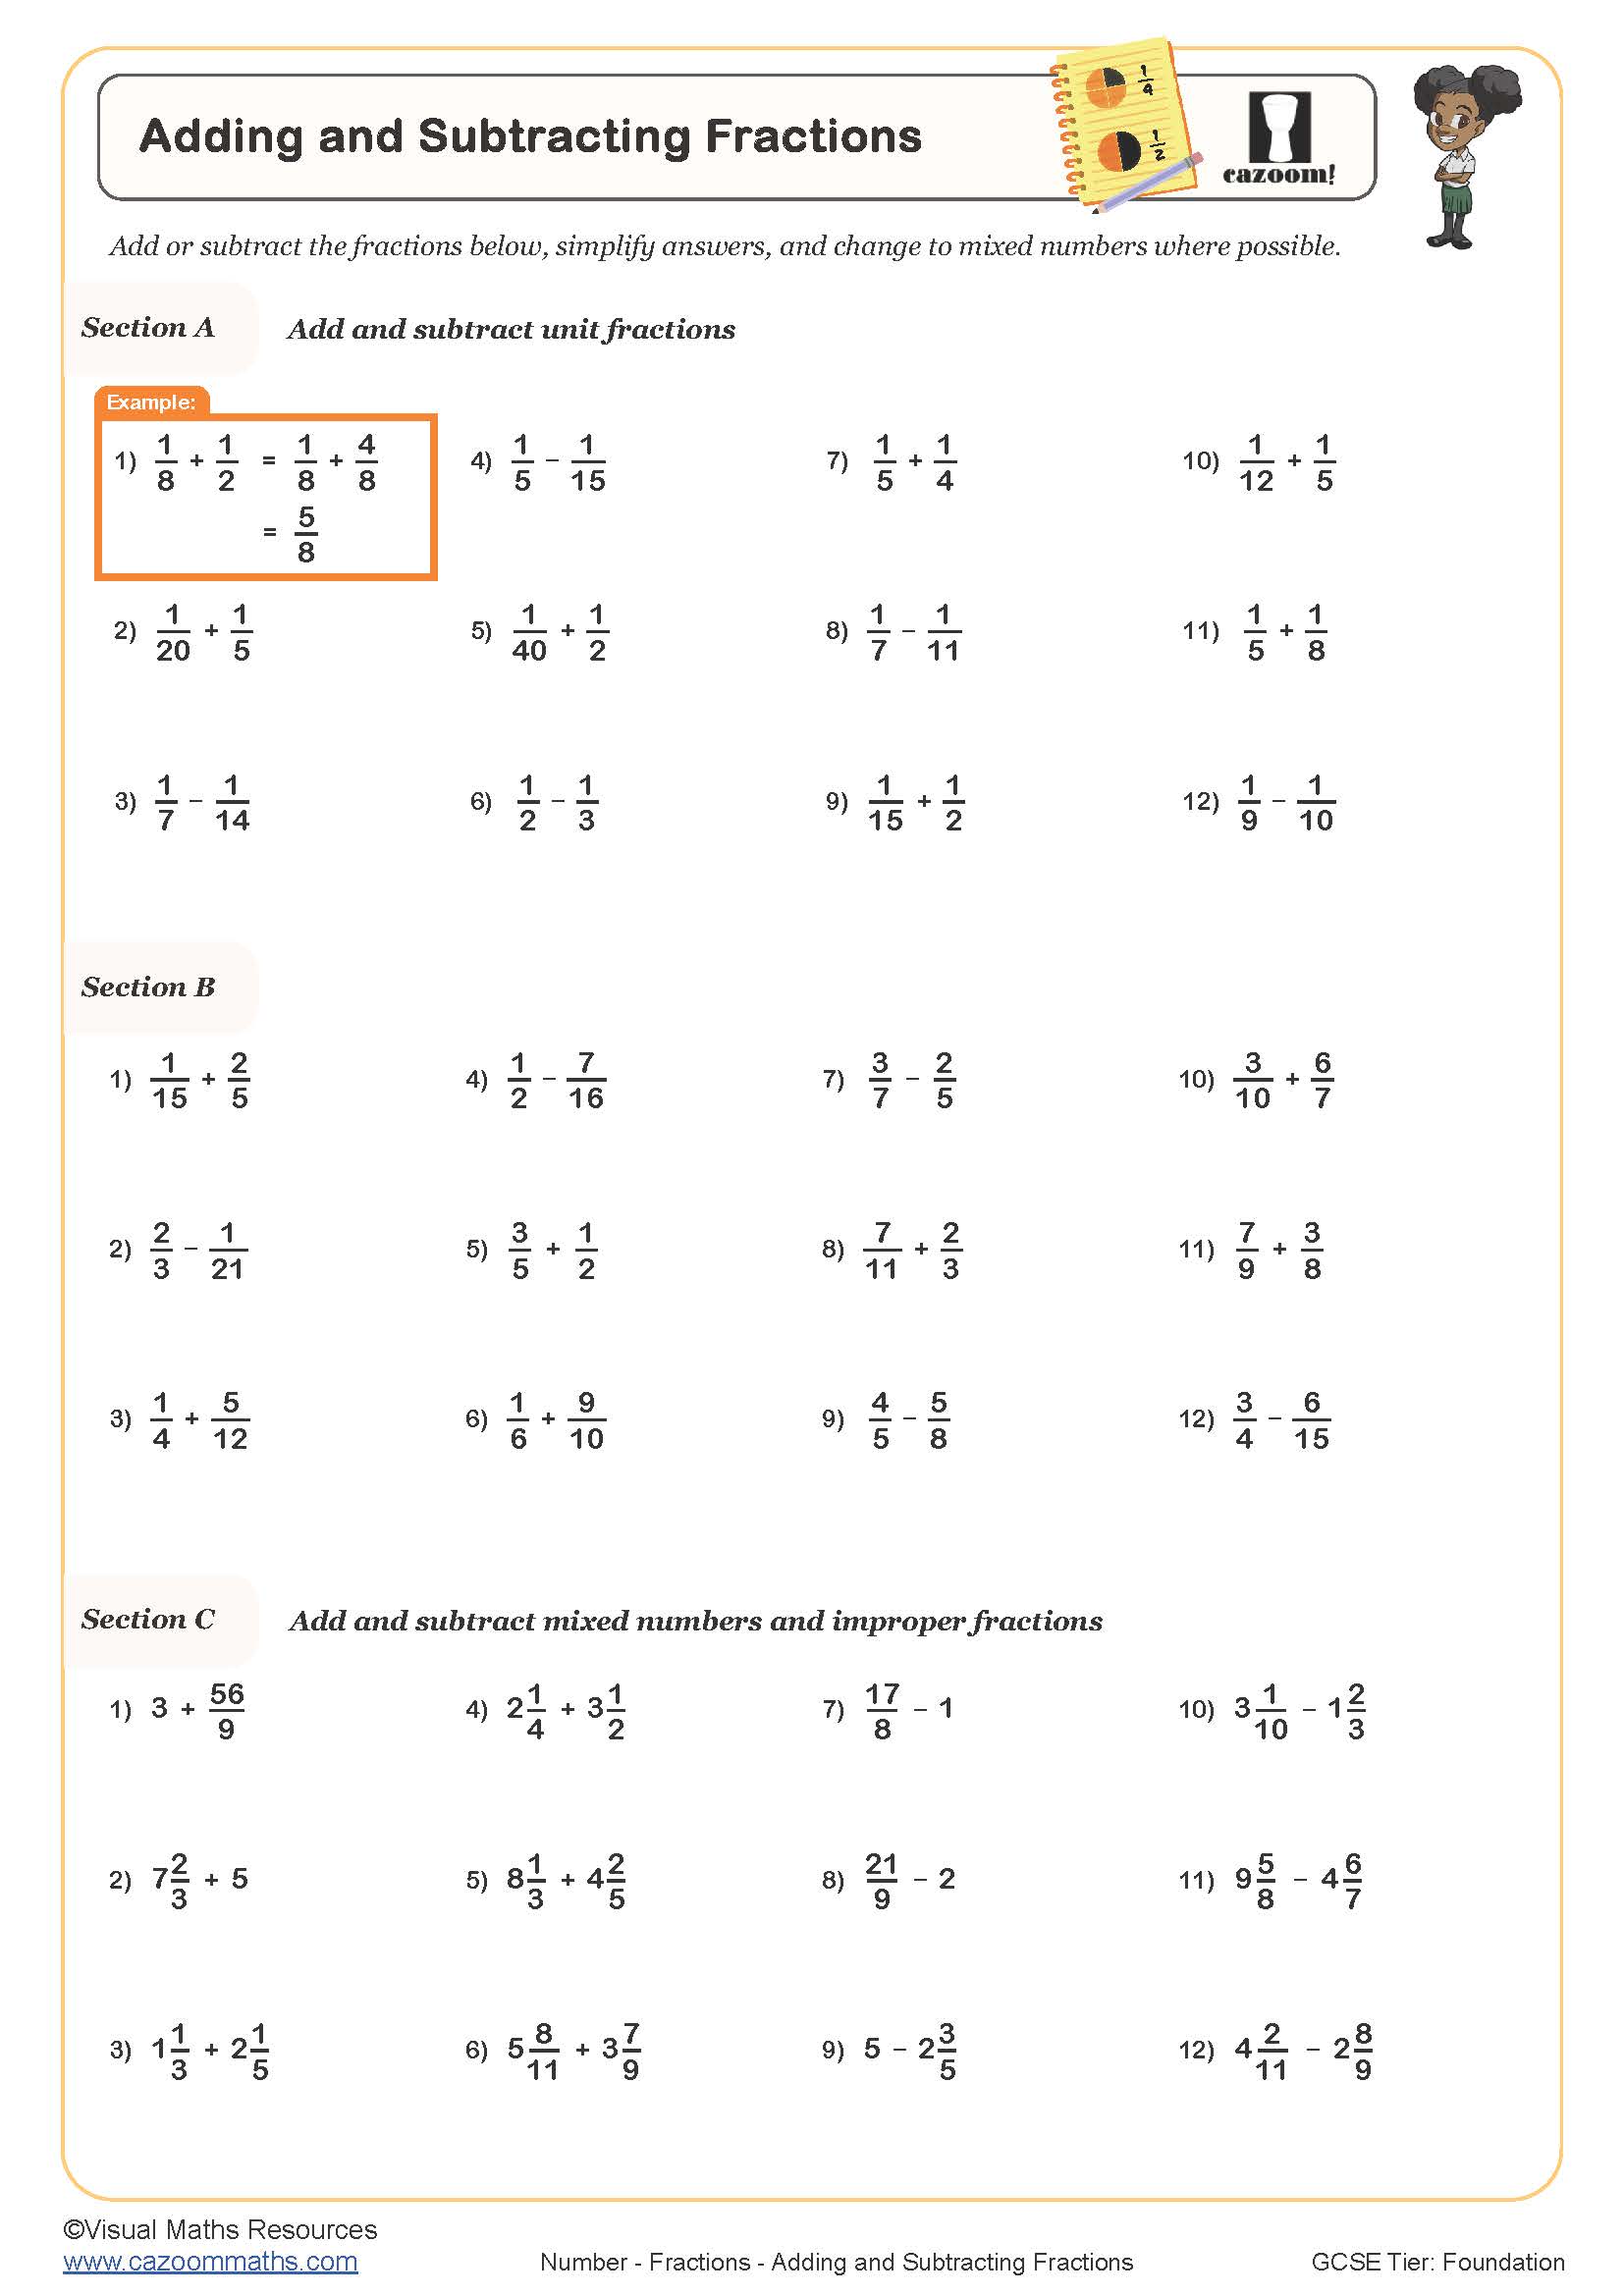 Adding and Subtracting Fractions worksheet created for students in year 8 and 9